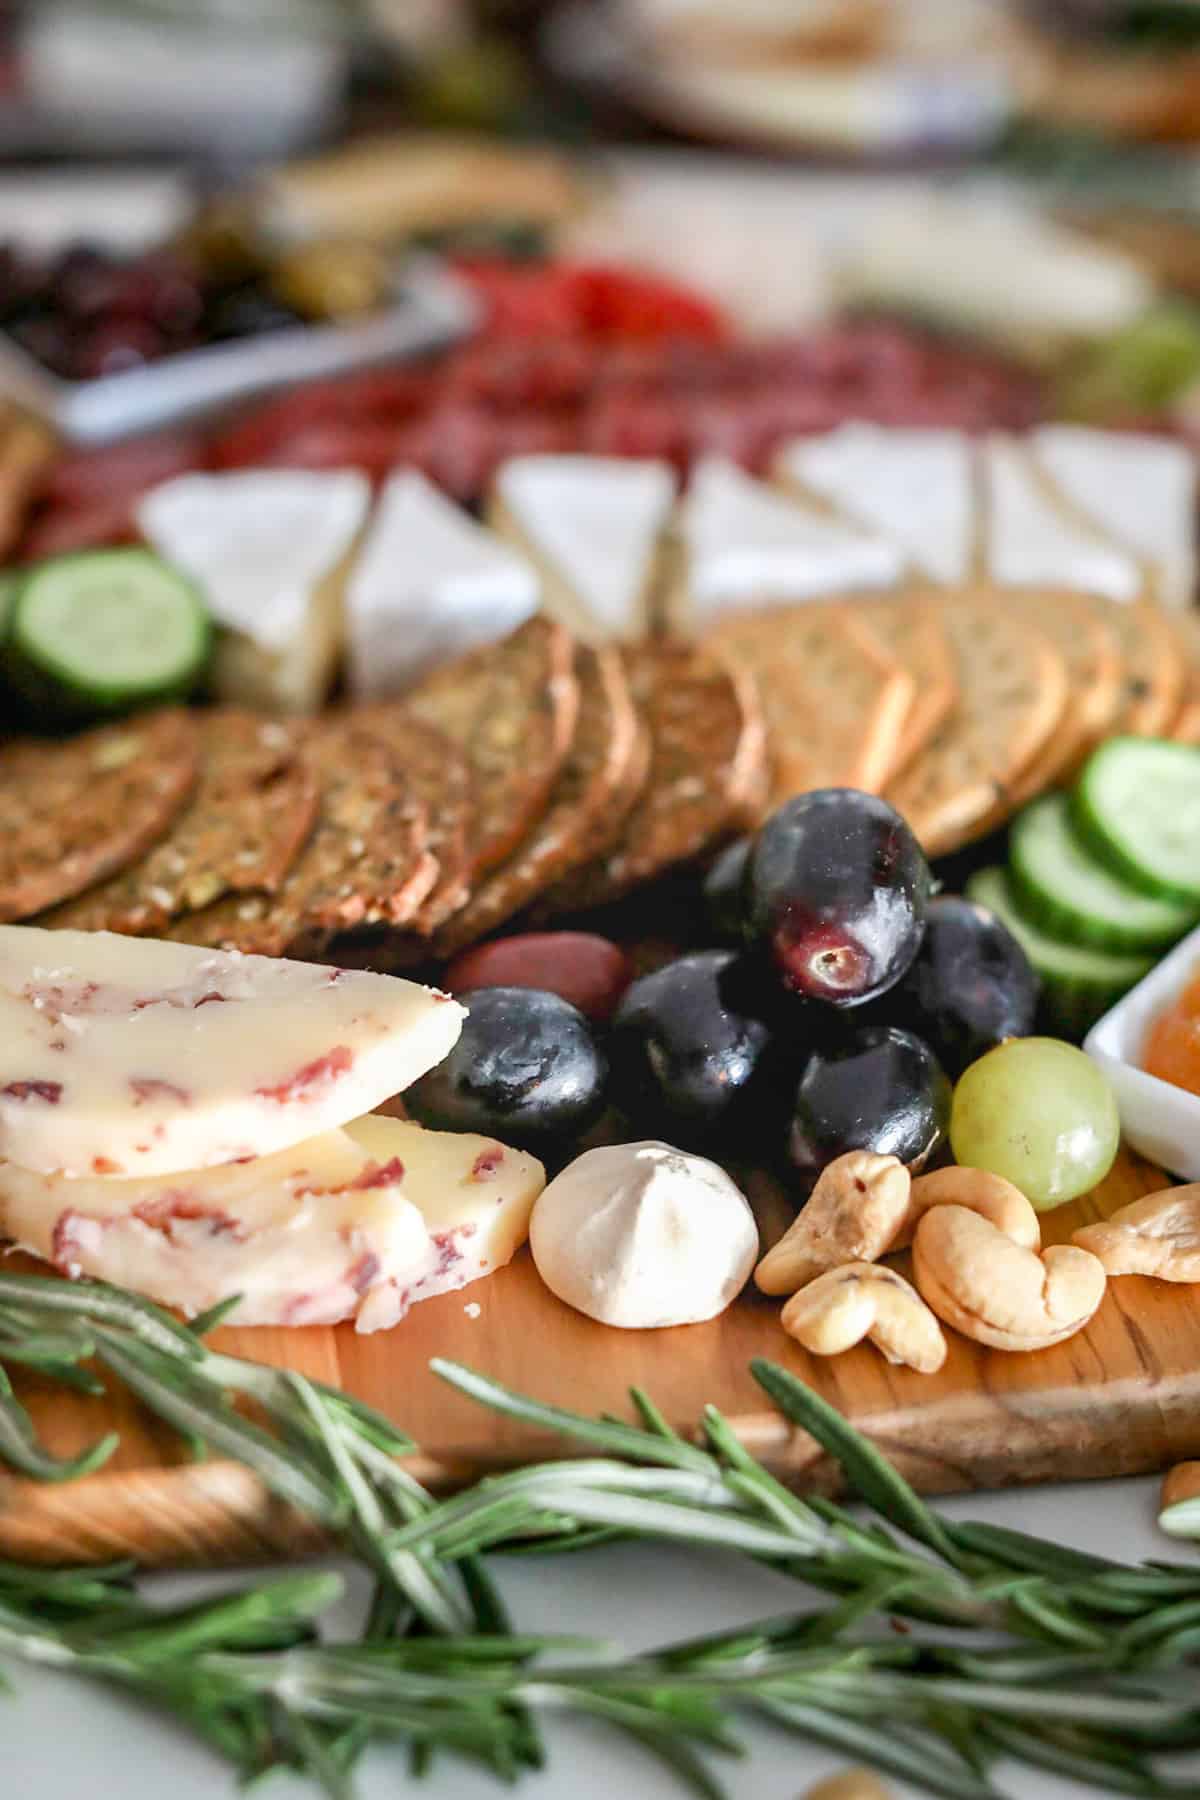 Meats, cheeses and nuts on a board.